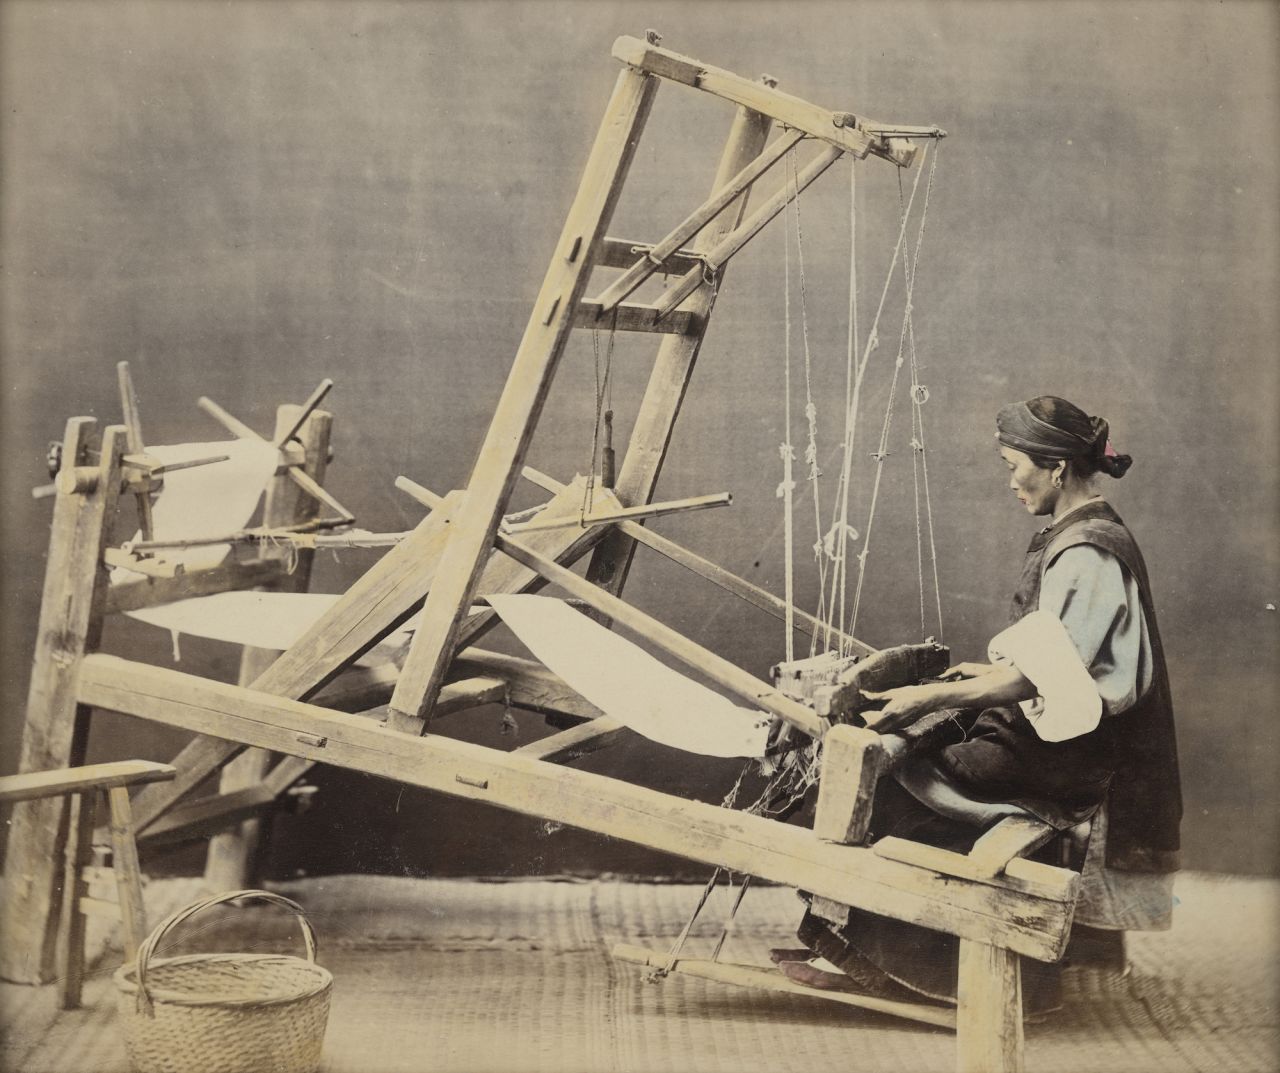 The 15,000-strong photo collection features everyday Chinese tradespeople from the mid-19th century, like this weaver. After being developed, some of the images were hand-colored by painters.